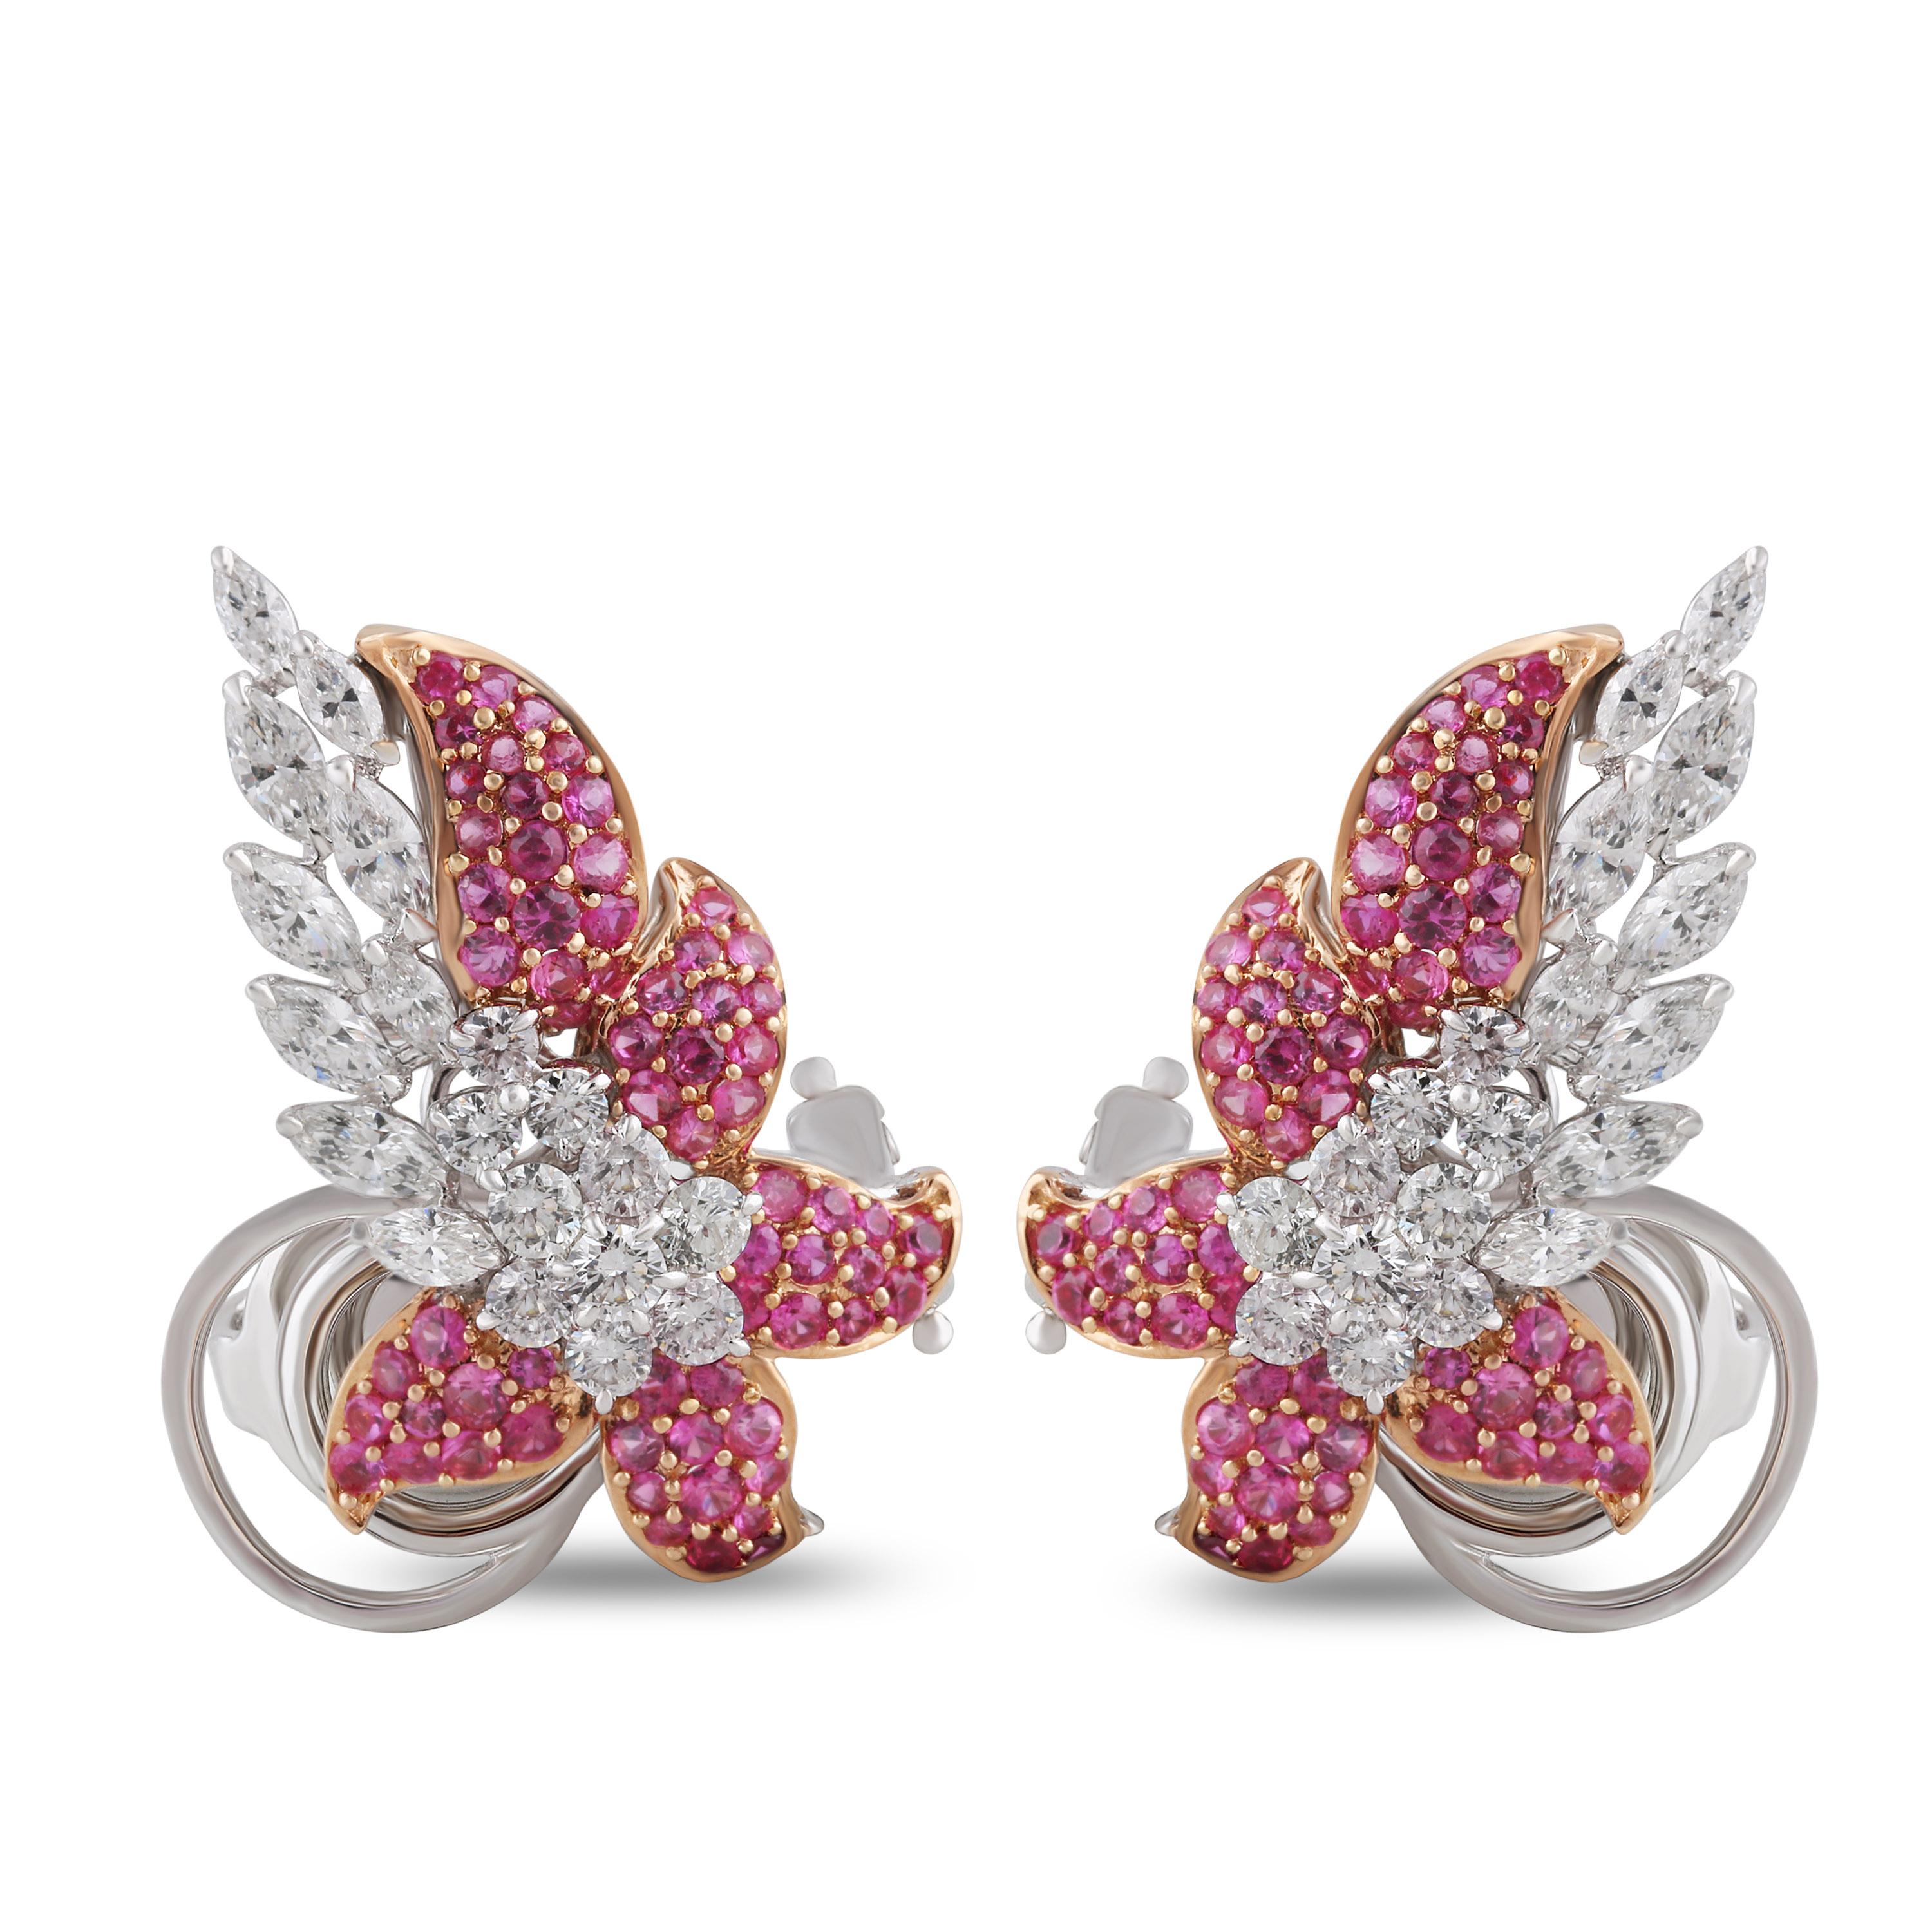 Marquise Cut Studio Rêves Diamonds and Pink Sapphire Clip-On Earrings in 18 Karat Gold For Sale